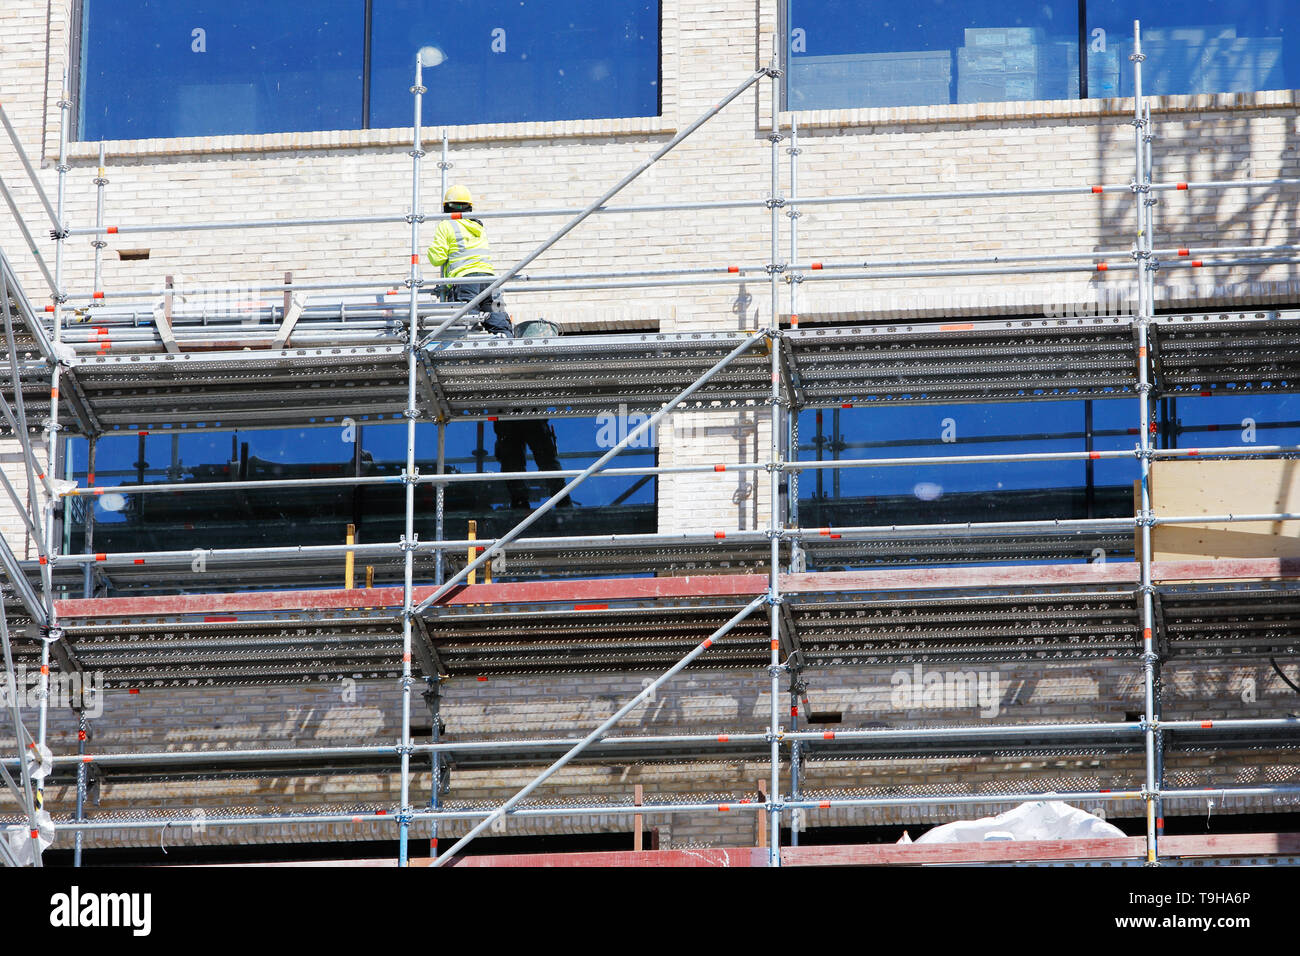 A new building under construction with a worker standing on the scaffolding. Stock Photo